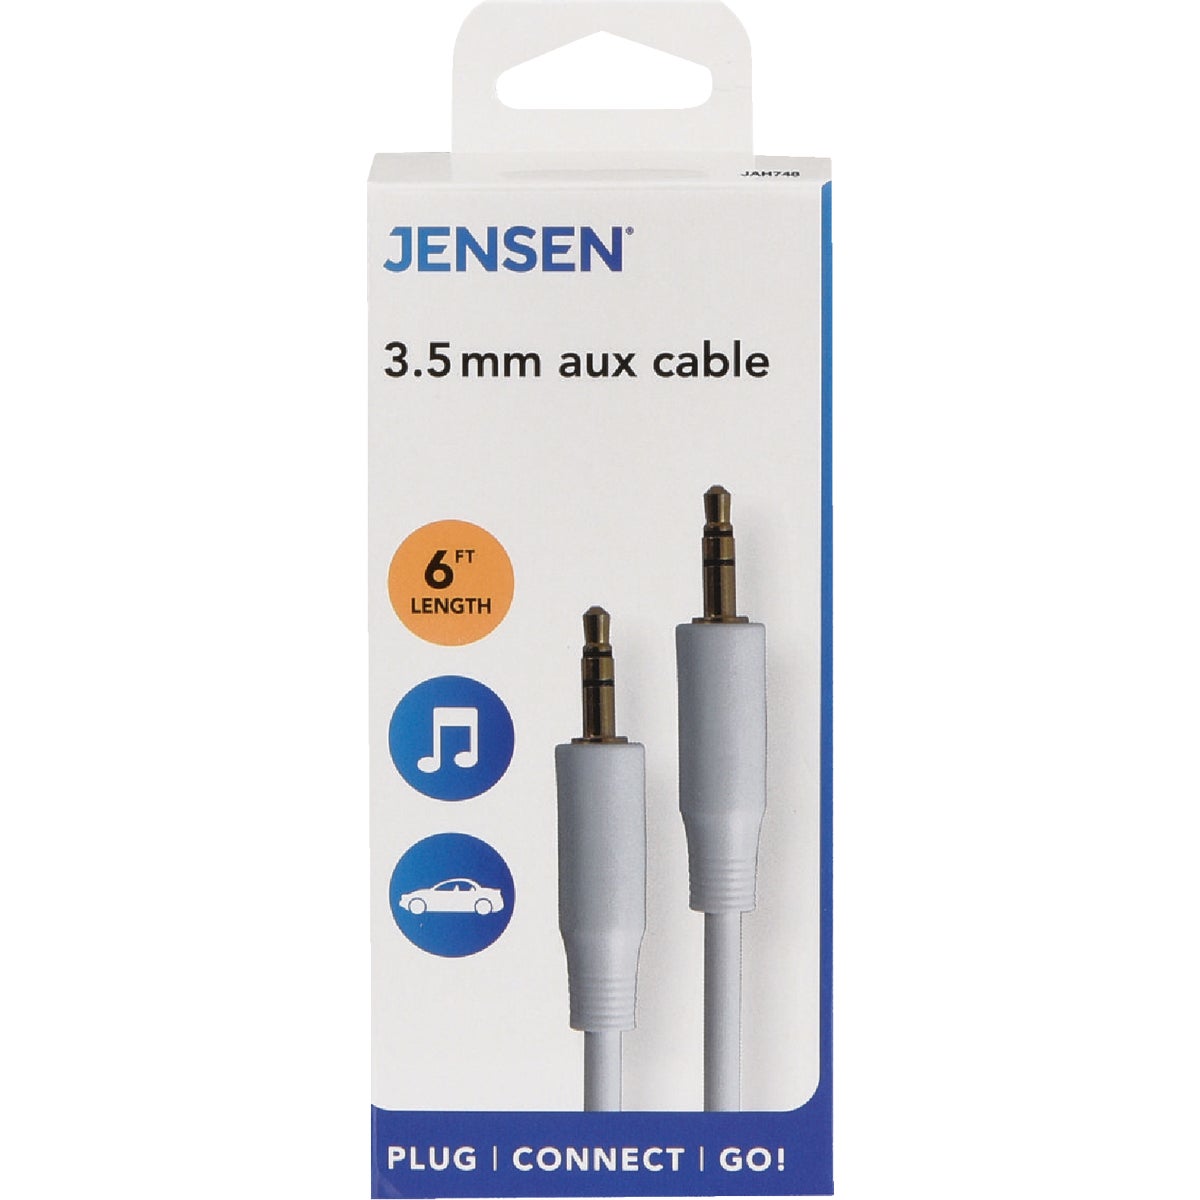 Item 500289, Durable cable used to connect portable audio players to a stereo or auto 